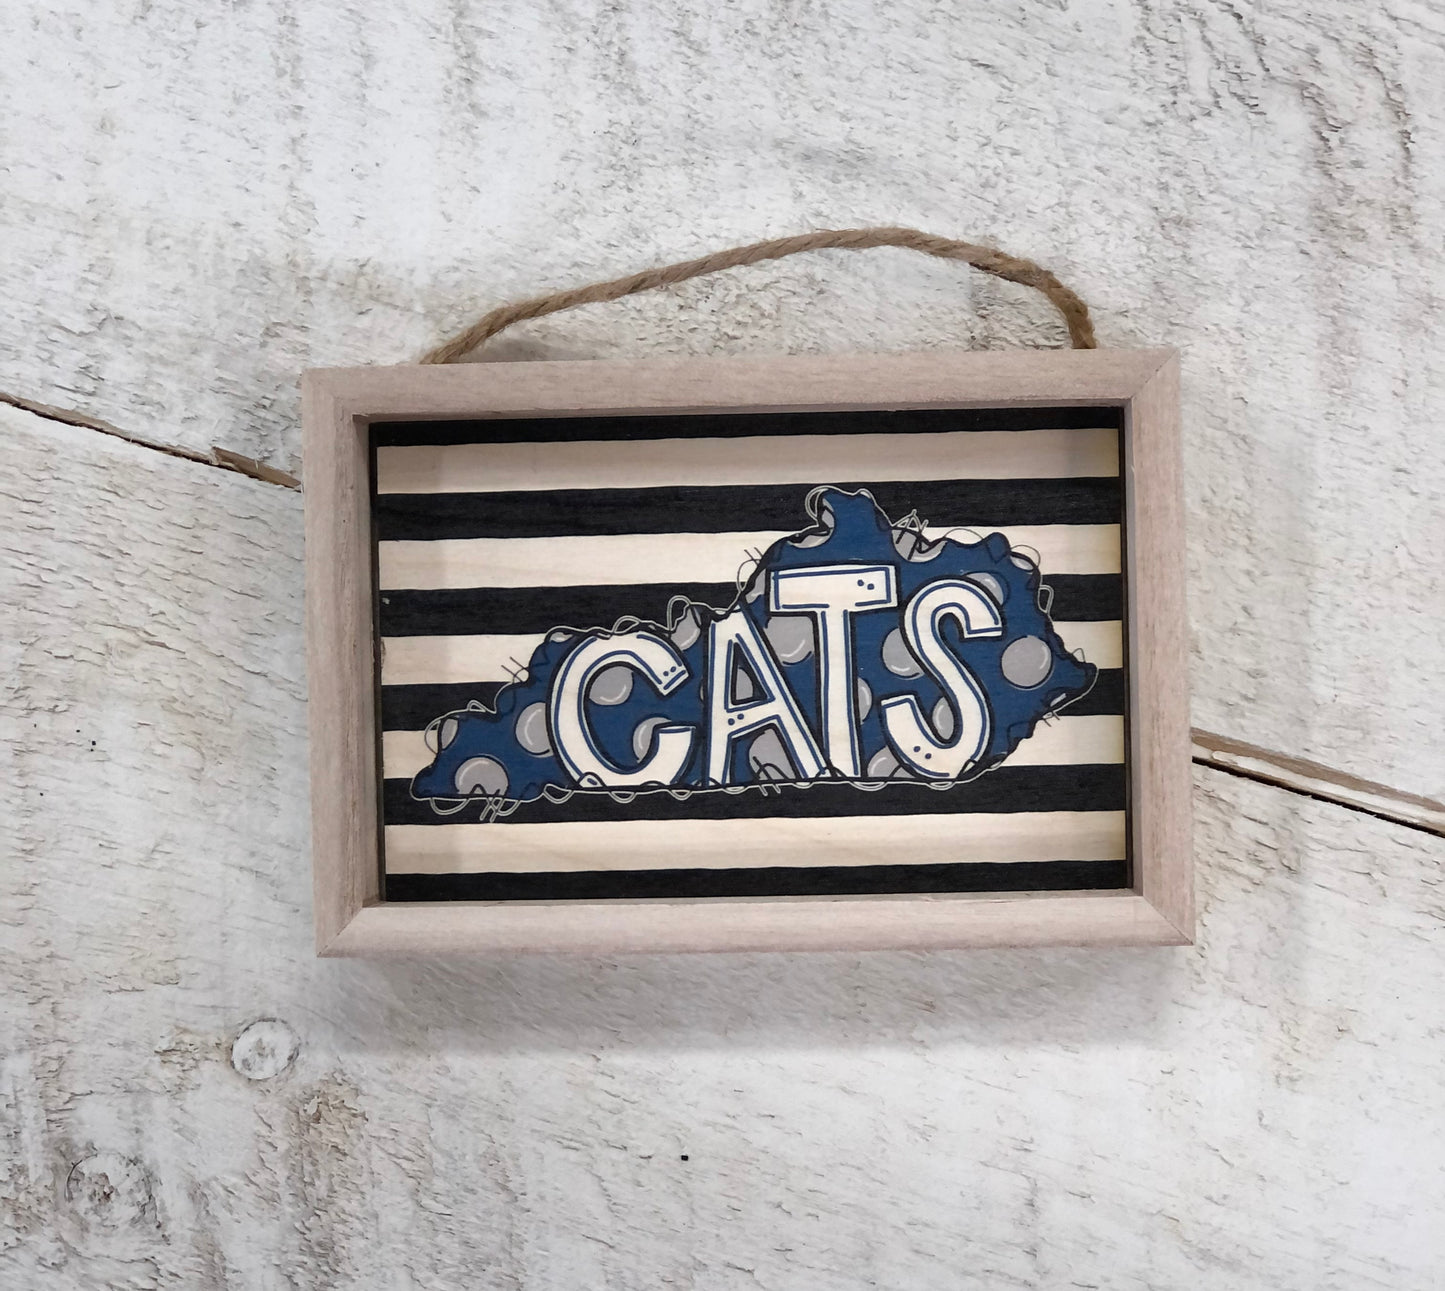 5" x 4" State of KY with CATS wooden sign